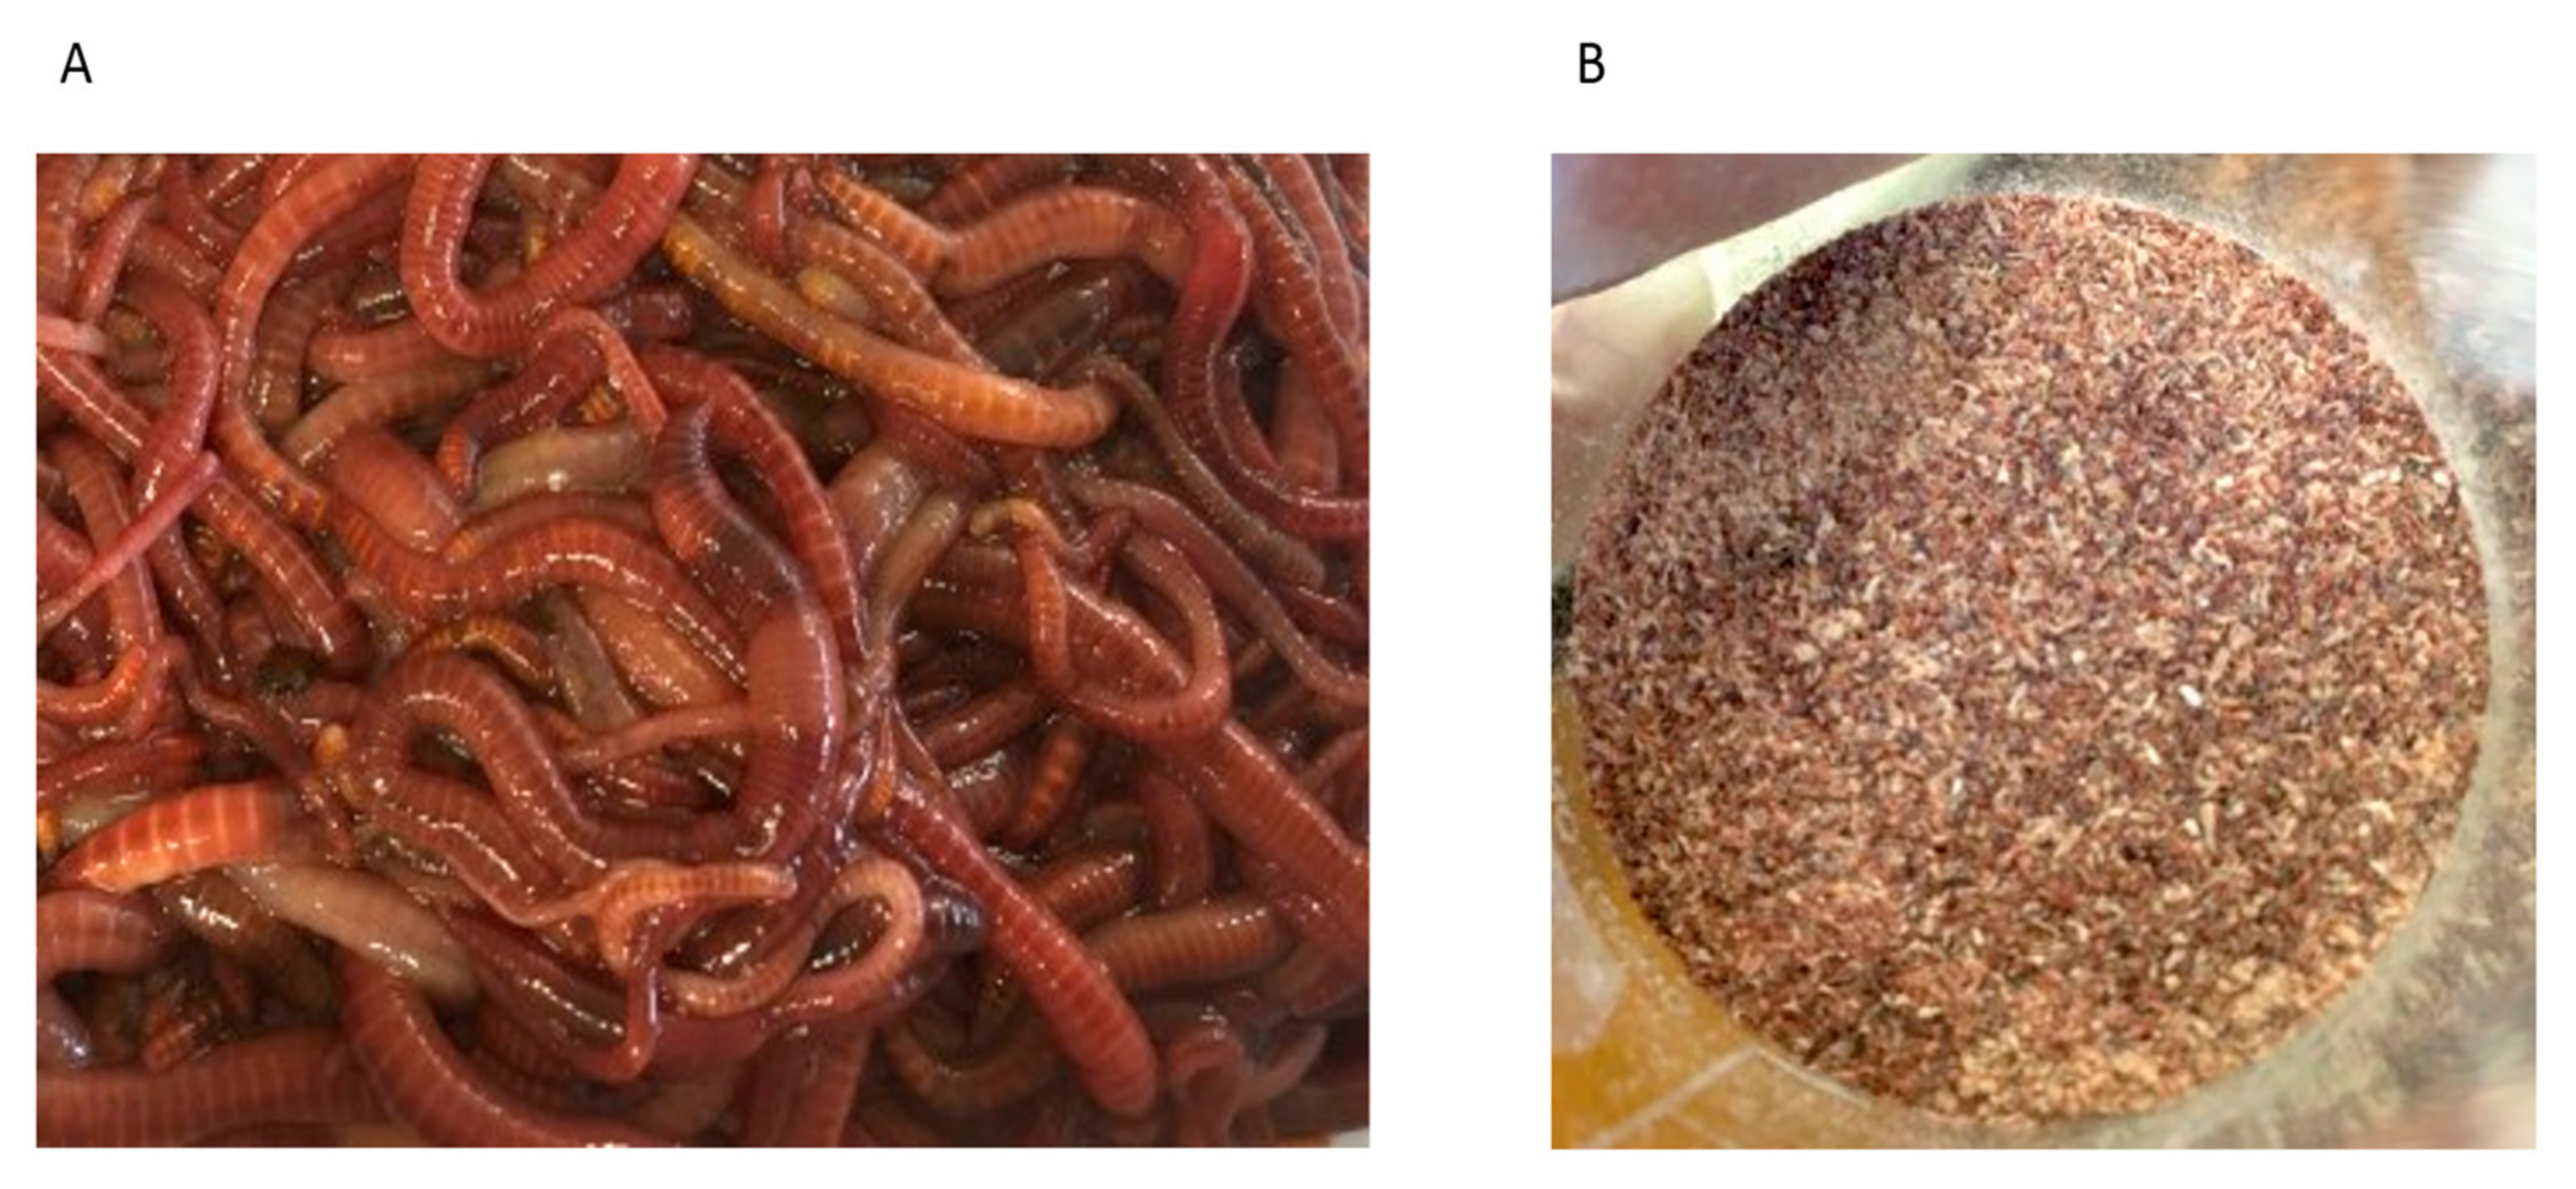 Foods | Free Full-Text | Earth Worming&mdash;An Evaluation of Earthworm  (Eisenia andrei) as an Alternative Food Source